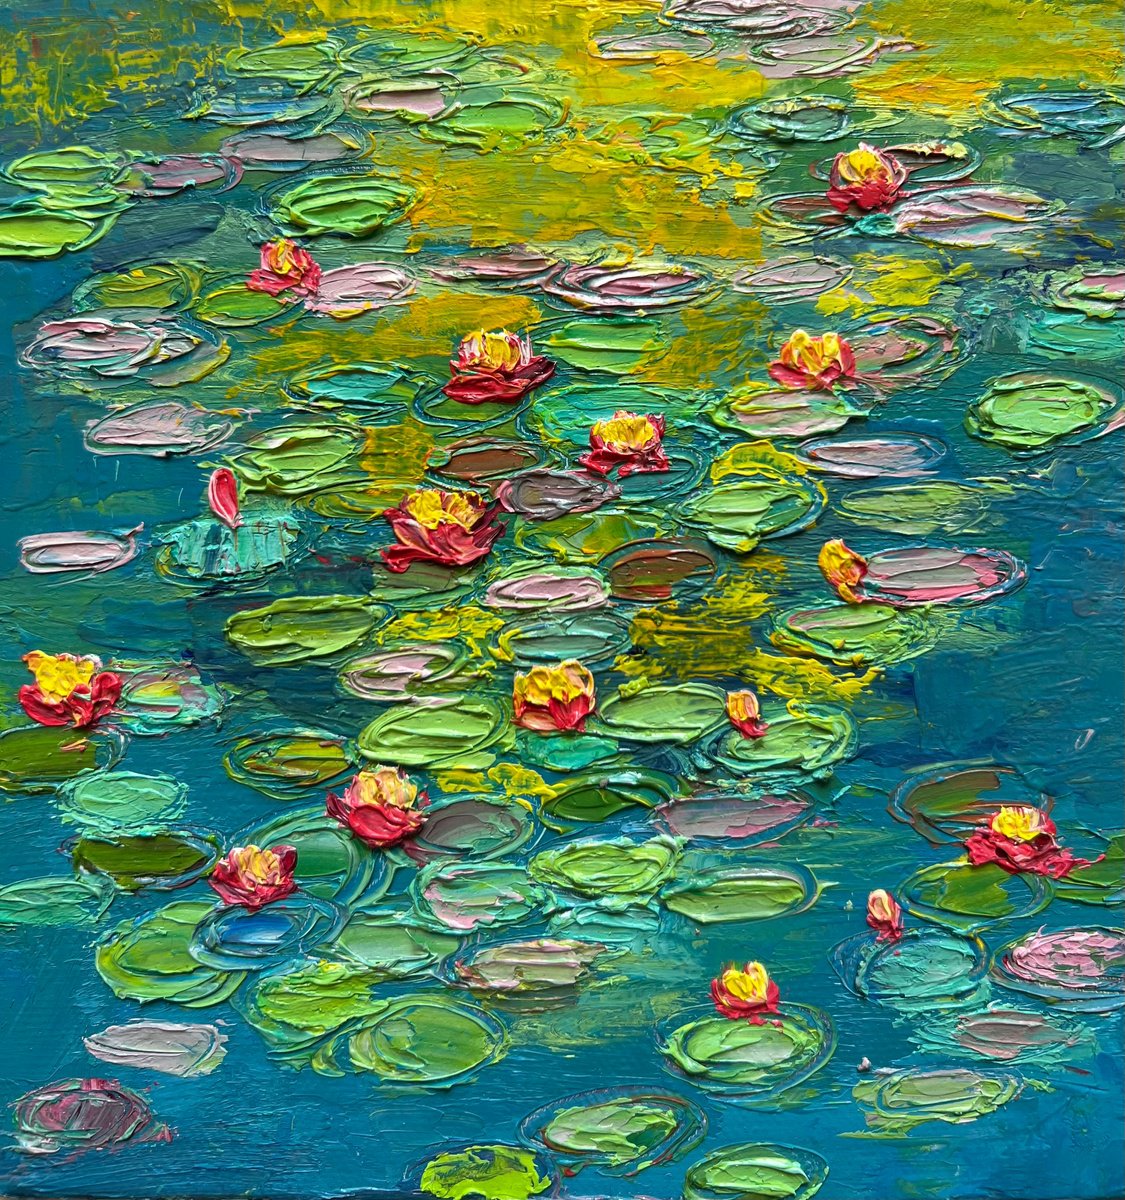 Evening glow on water lilies by Amita Dand